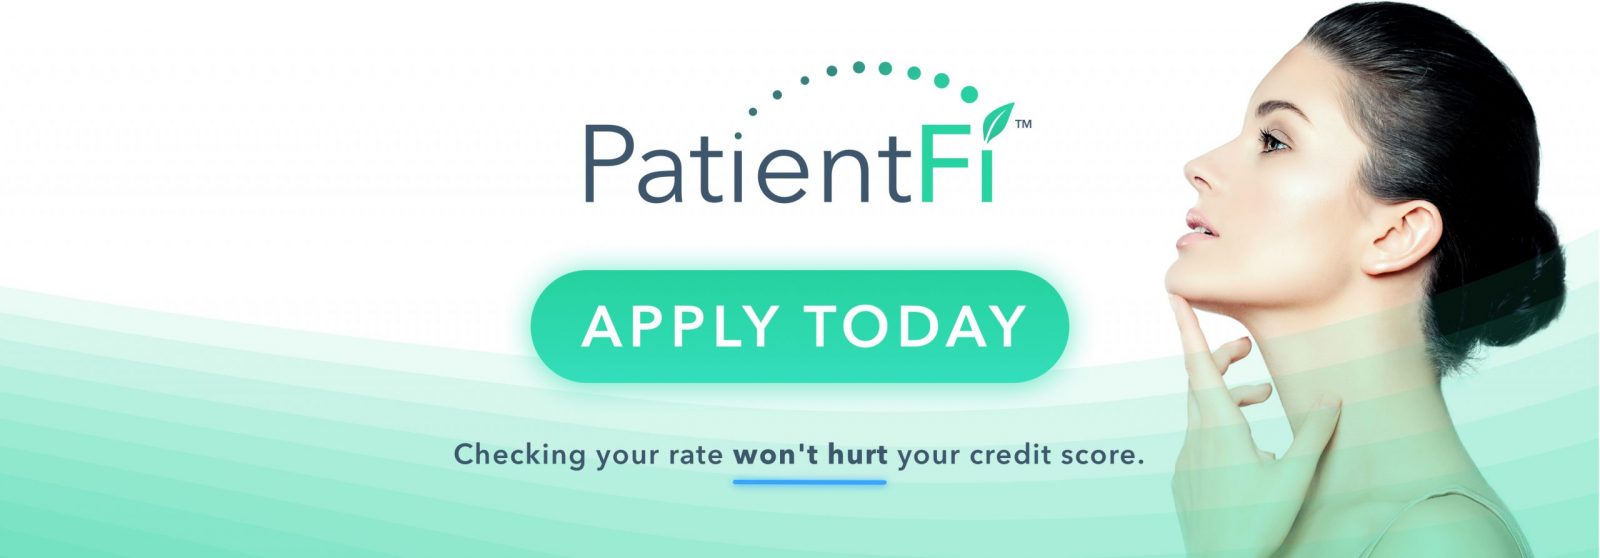 PatientFi Financing for medical services